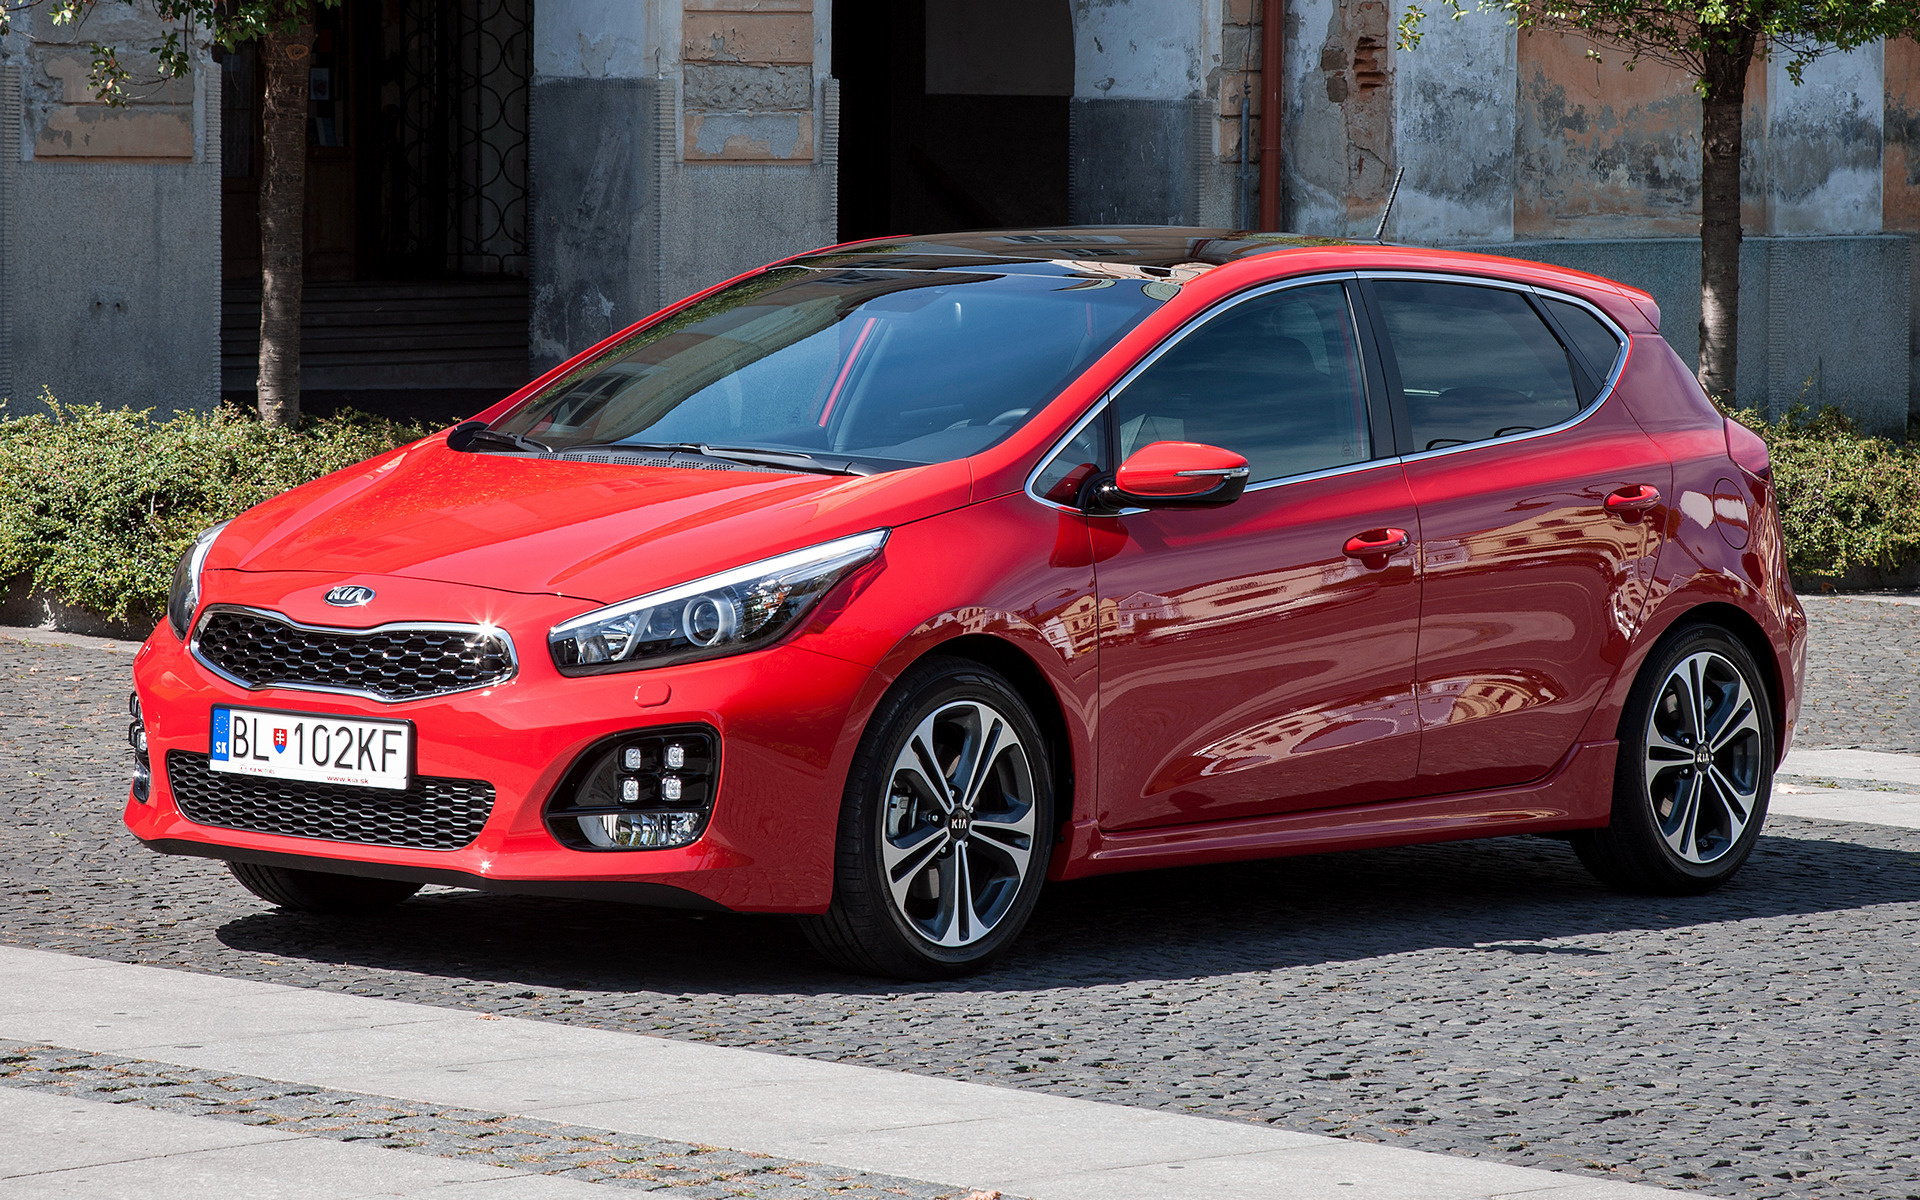 Kia cee'd GT-Line (2015) Wallpapers and HD Images - Car Pixel